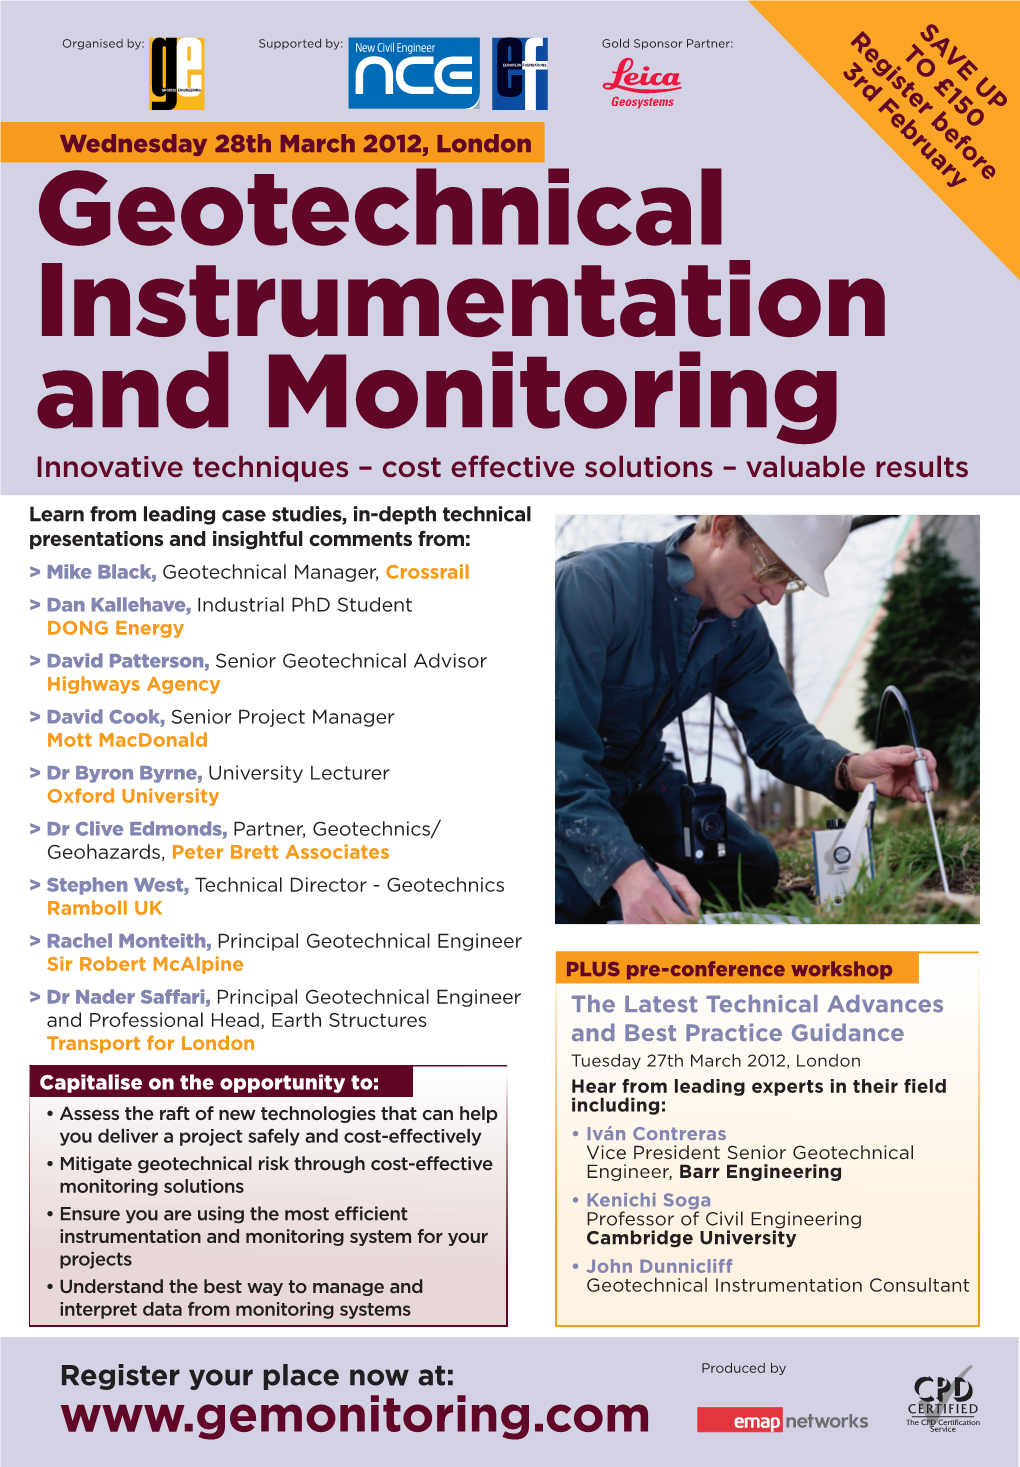 Geotechnical Instrumentation and Monitoring.Indd 2 22/12/2011 11:38 Geotechnical Instrumentation and Monitoring Pre-Conference Workshop